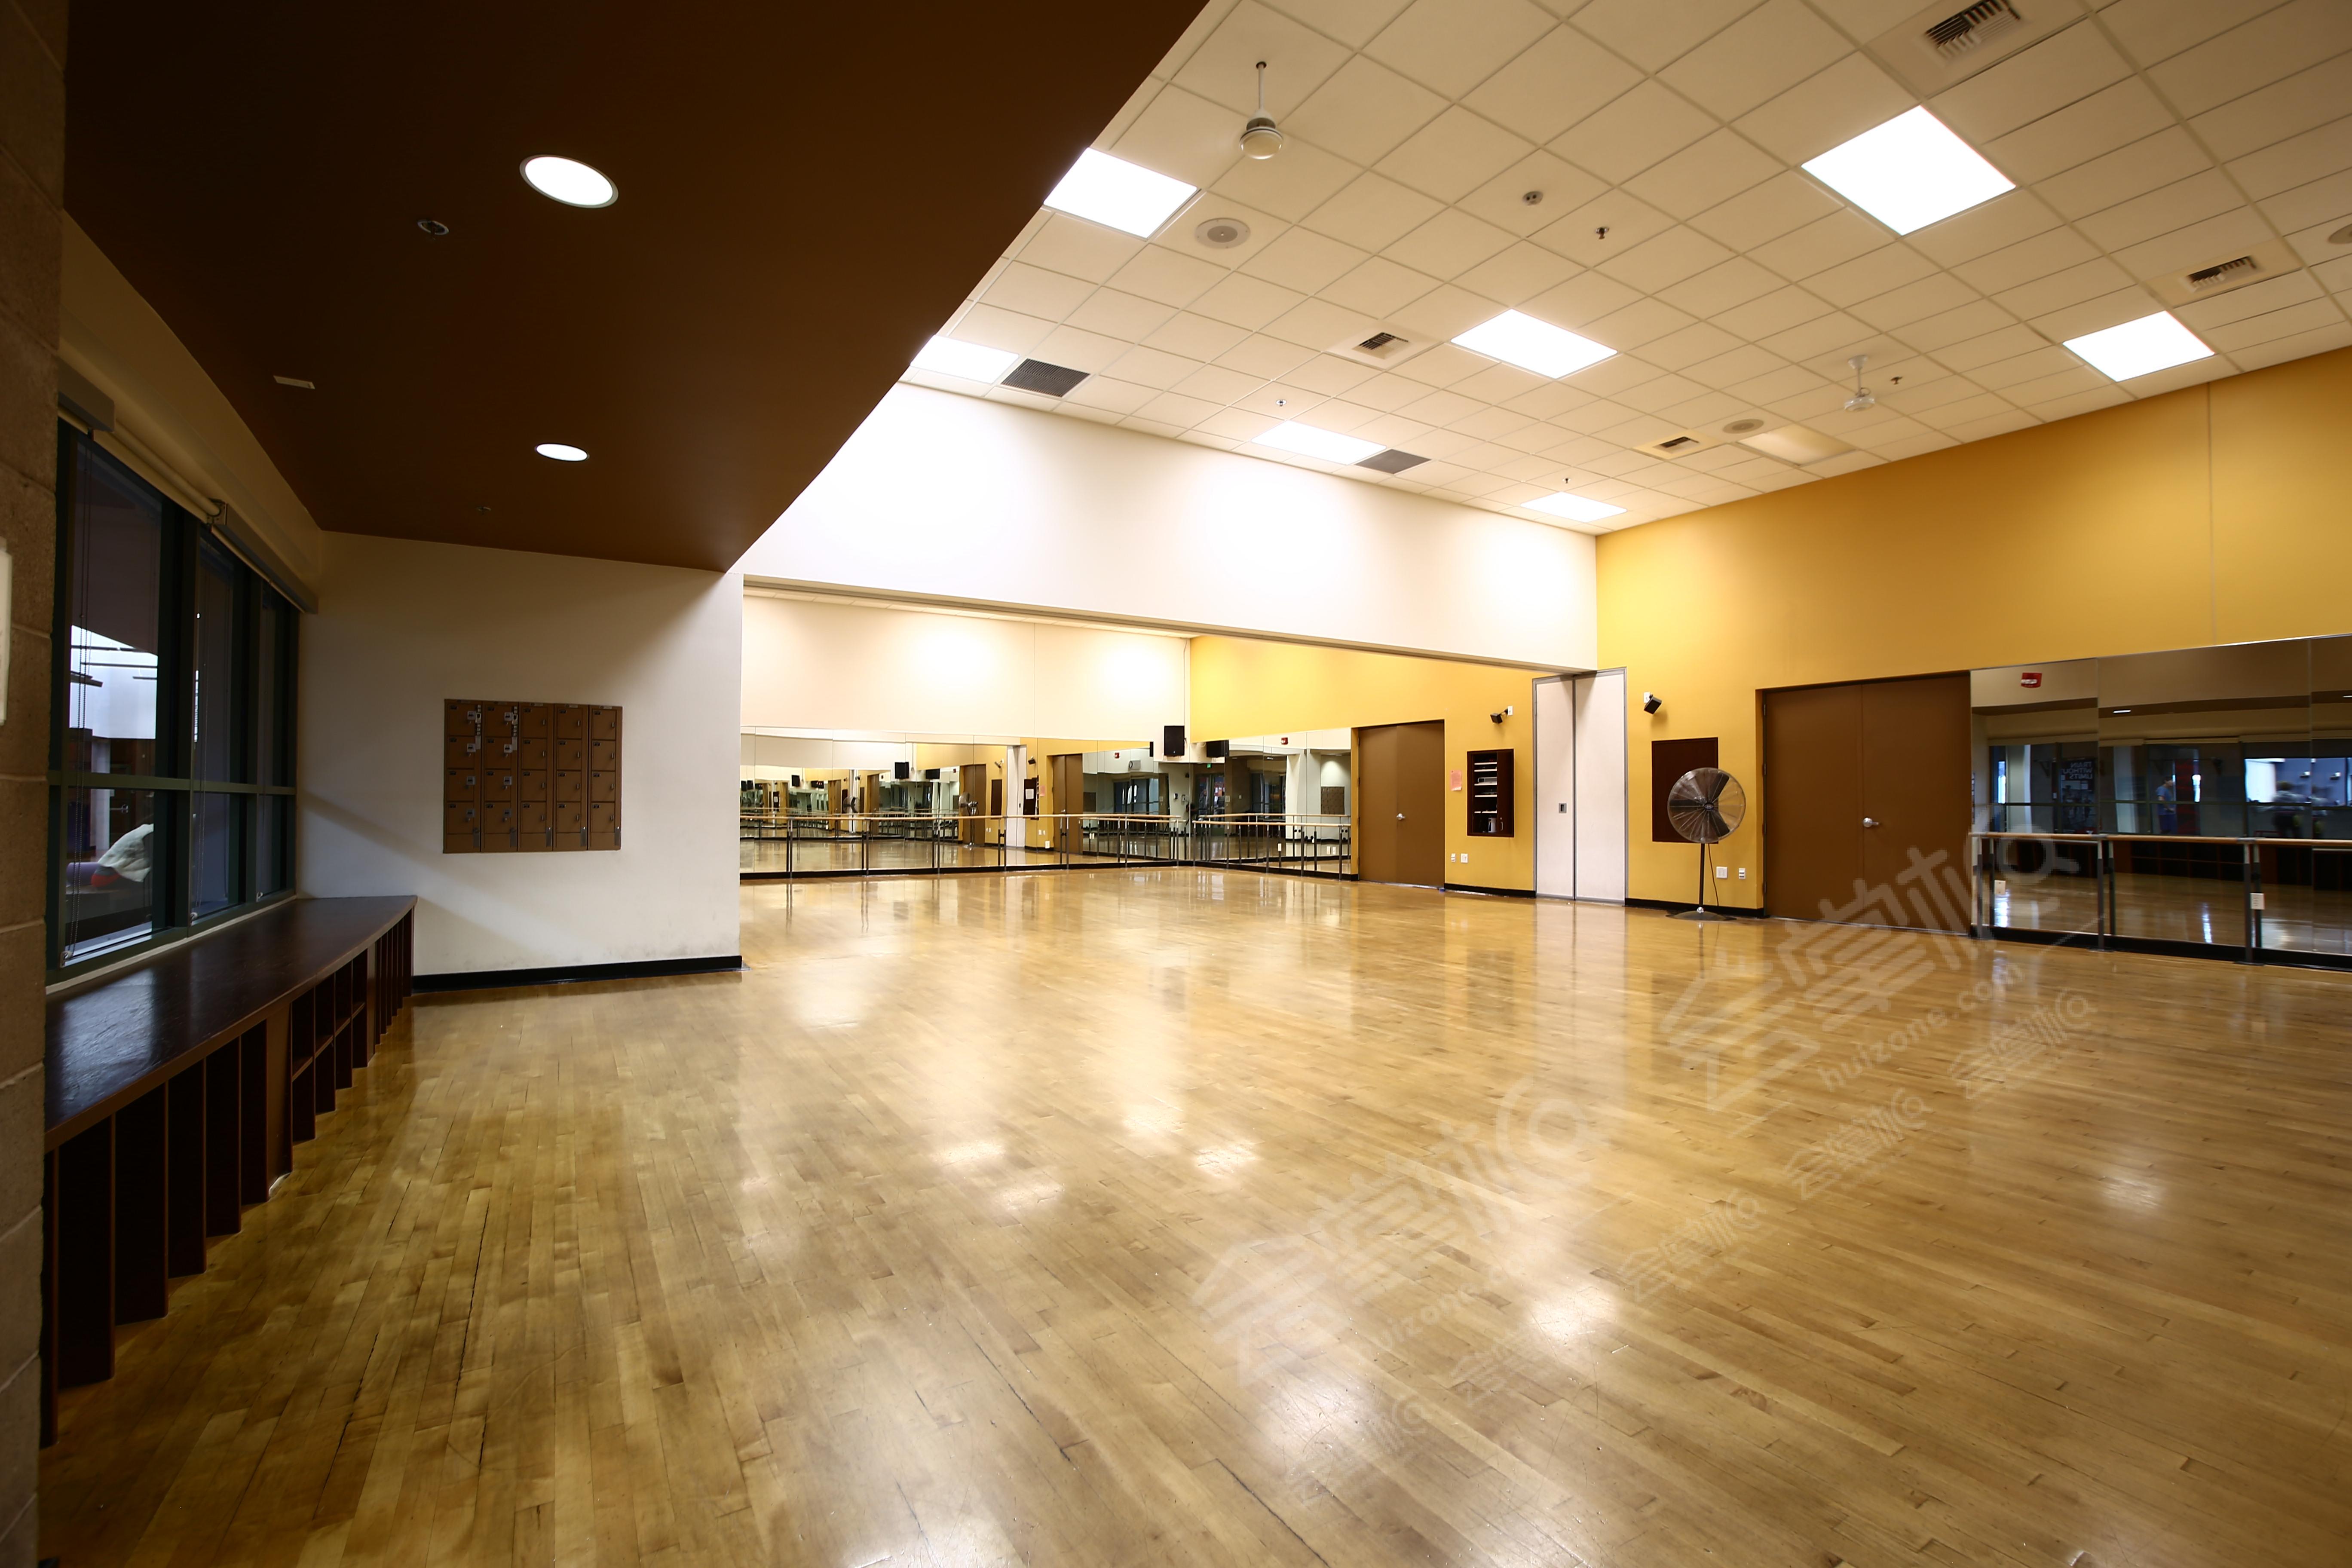 Aerobic/Fitness Studio with Floor to Ceiling Mirrors